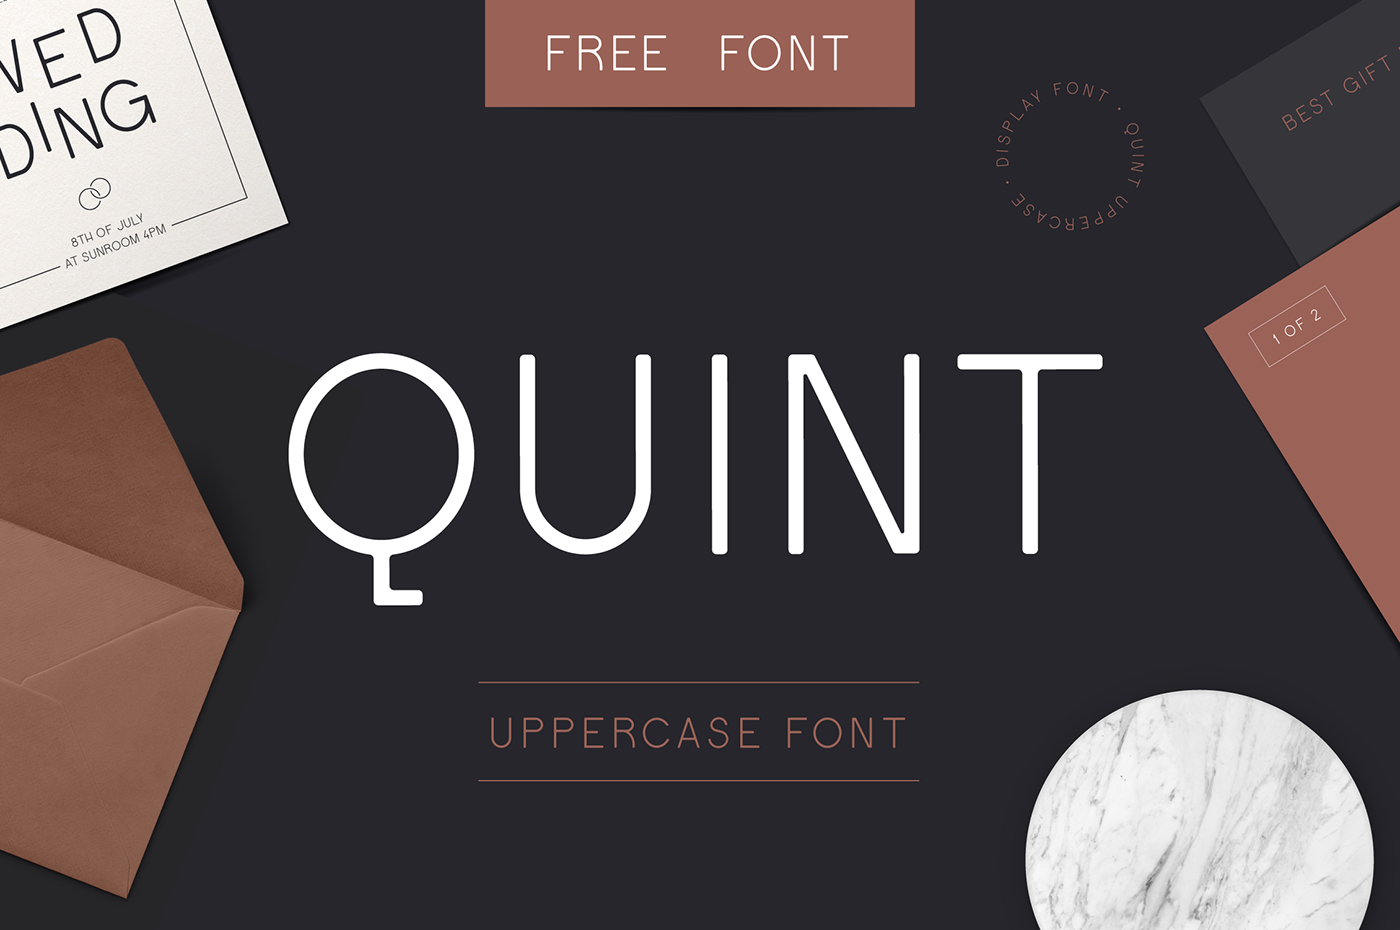 free Free font modern font Retro round Rounded Font Typeface typeface design typography   freebie